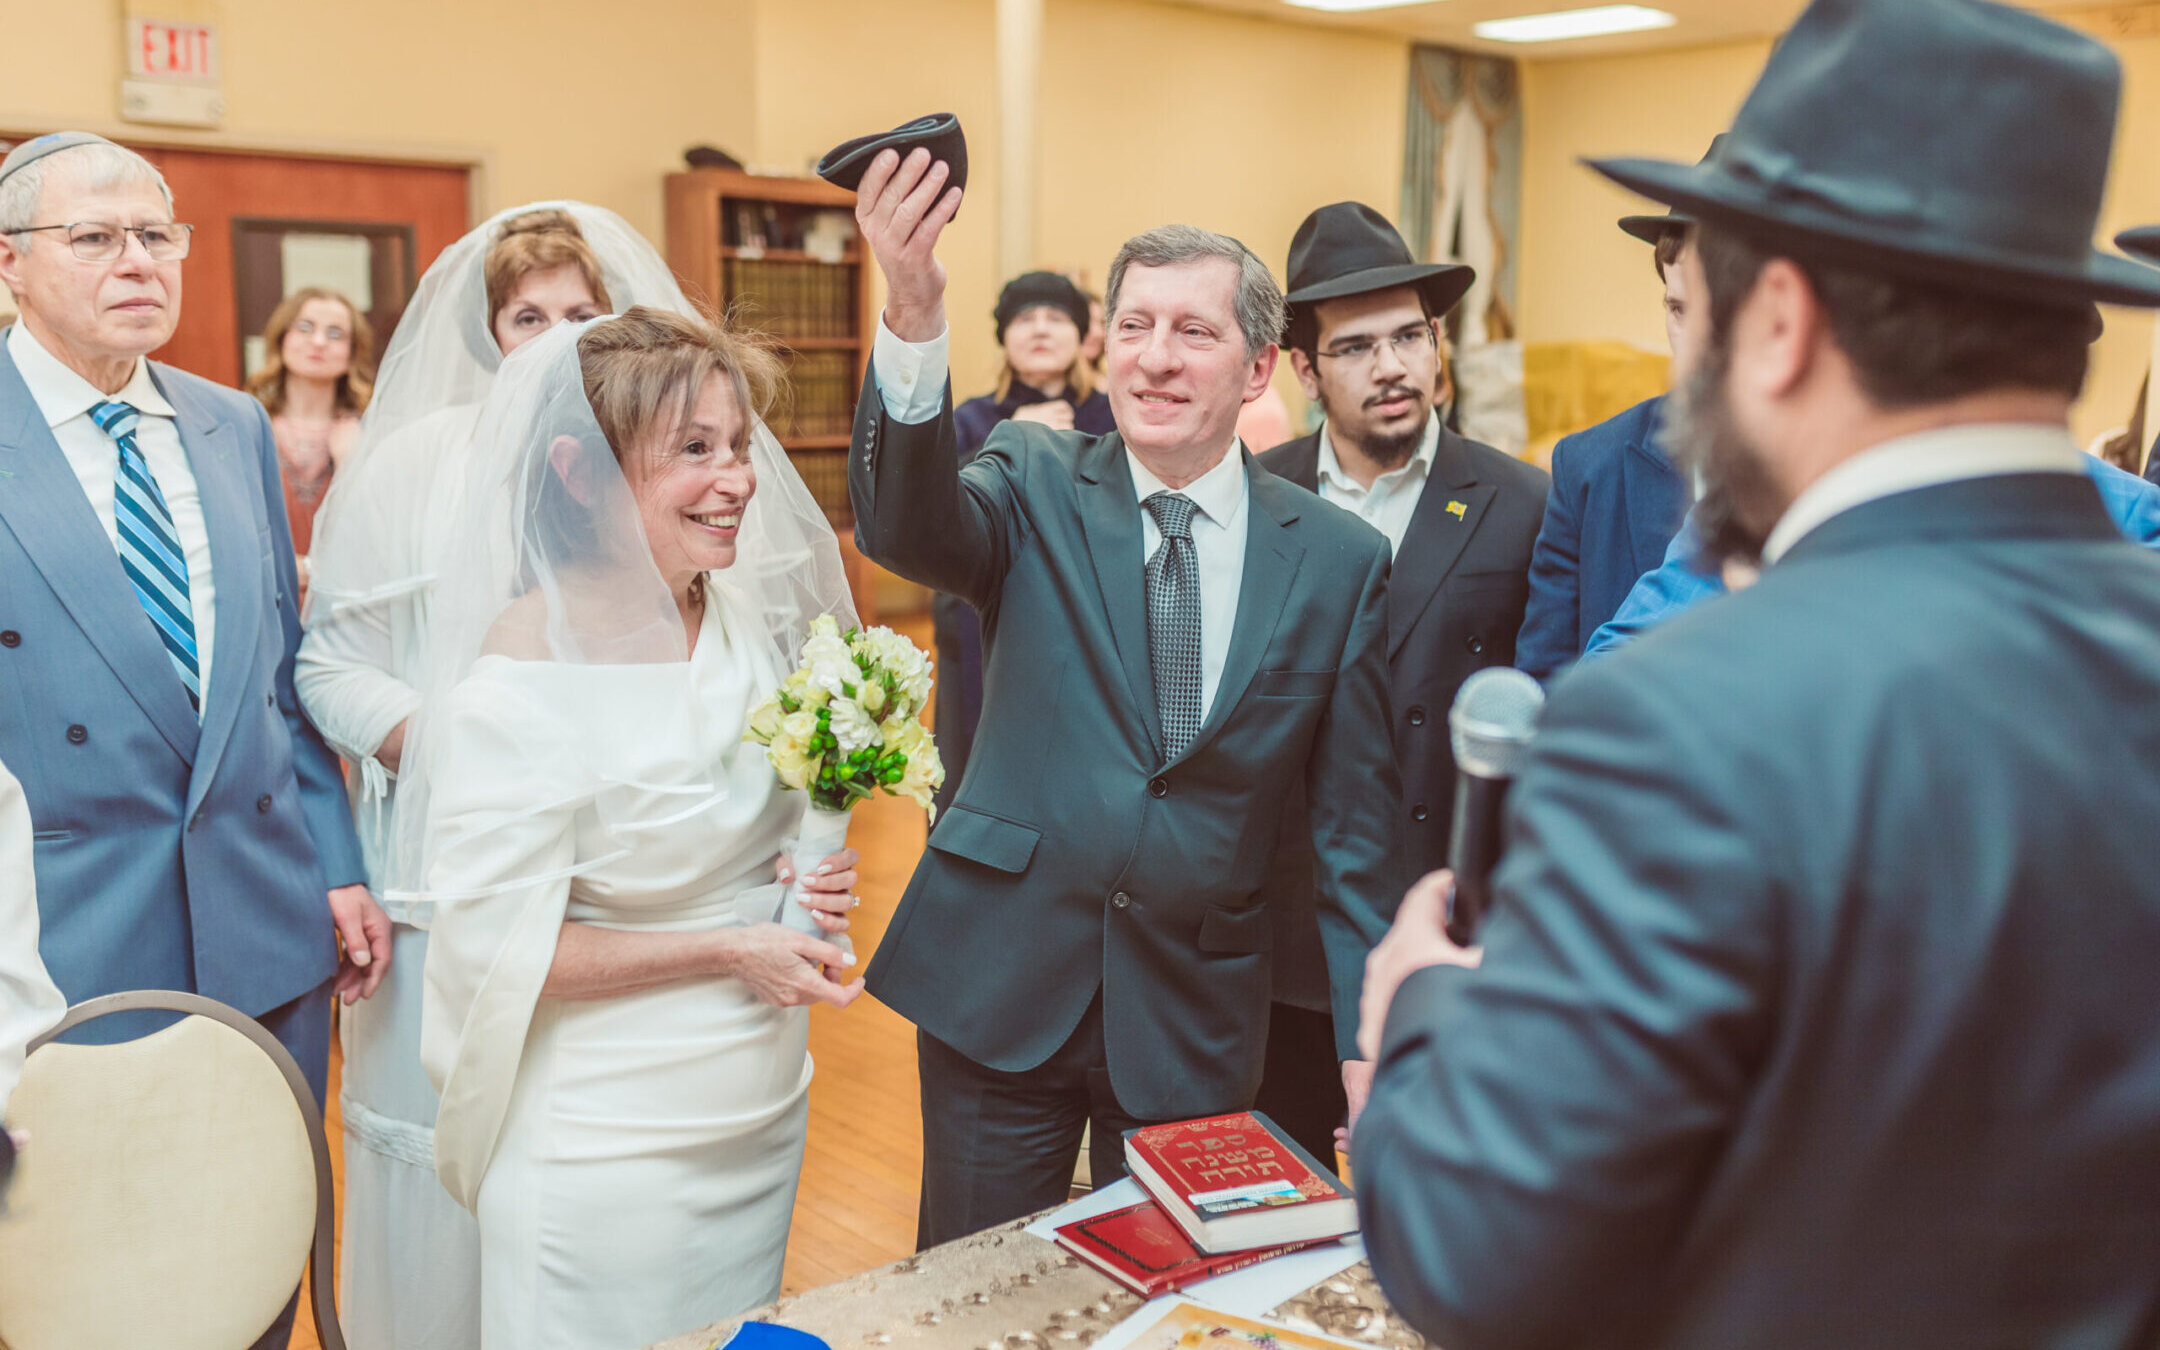 Alex Linkov raises a kippah, in a symbol of a Jewish wedding contract, next to his wife Rimma. The pair had a Jewish wedding in Boston after being married decades earlier in Ukraine. (Photo by Igor Klimov)